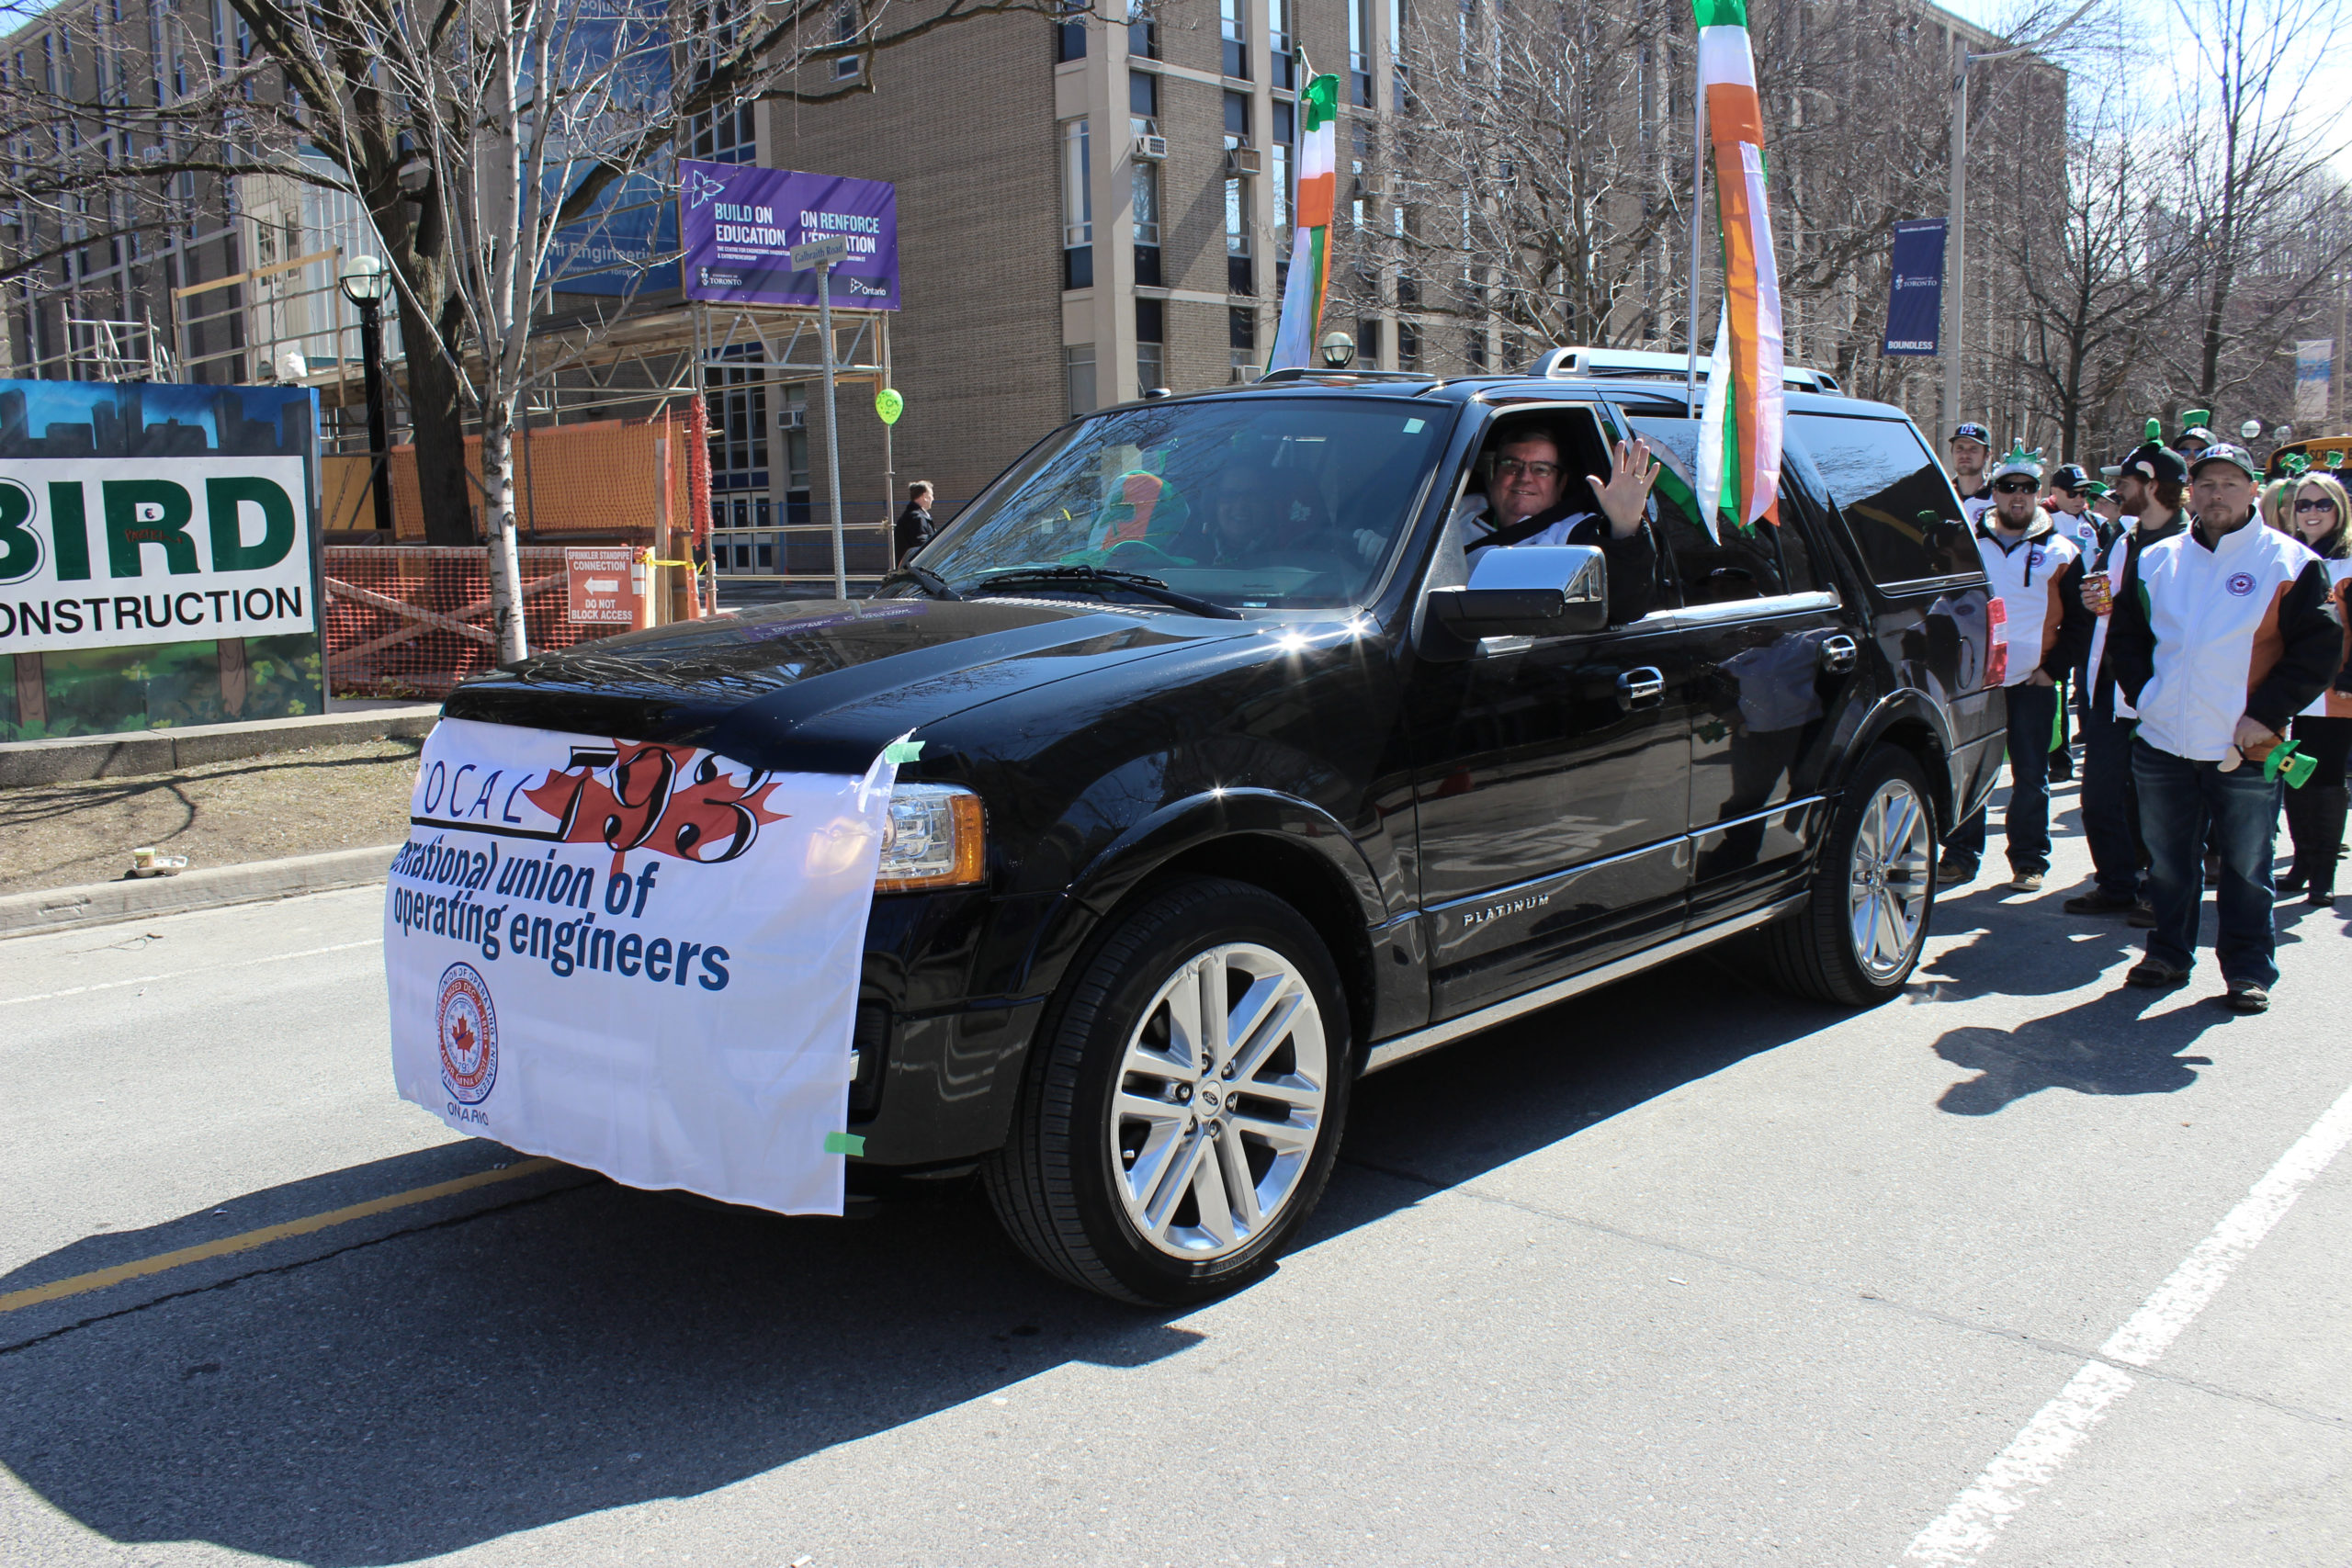 Local 793 Business manager Mike Gallagher waves to onlookers.